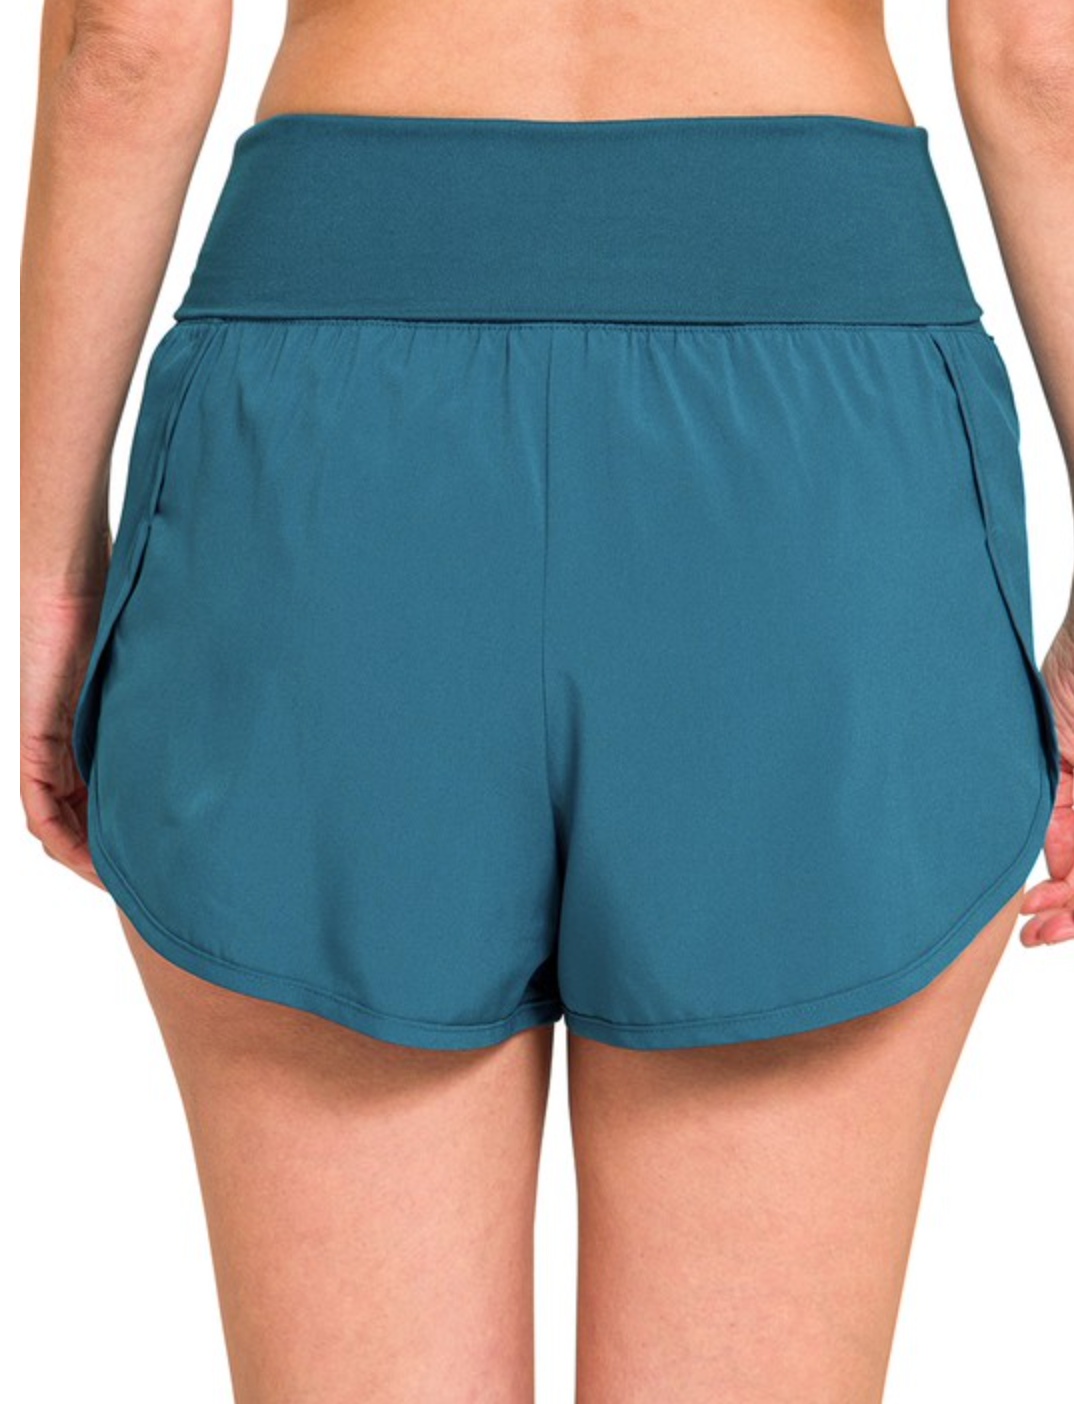 Teal - Athletic Shorts